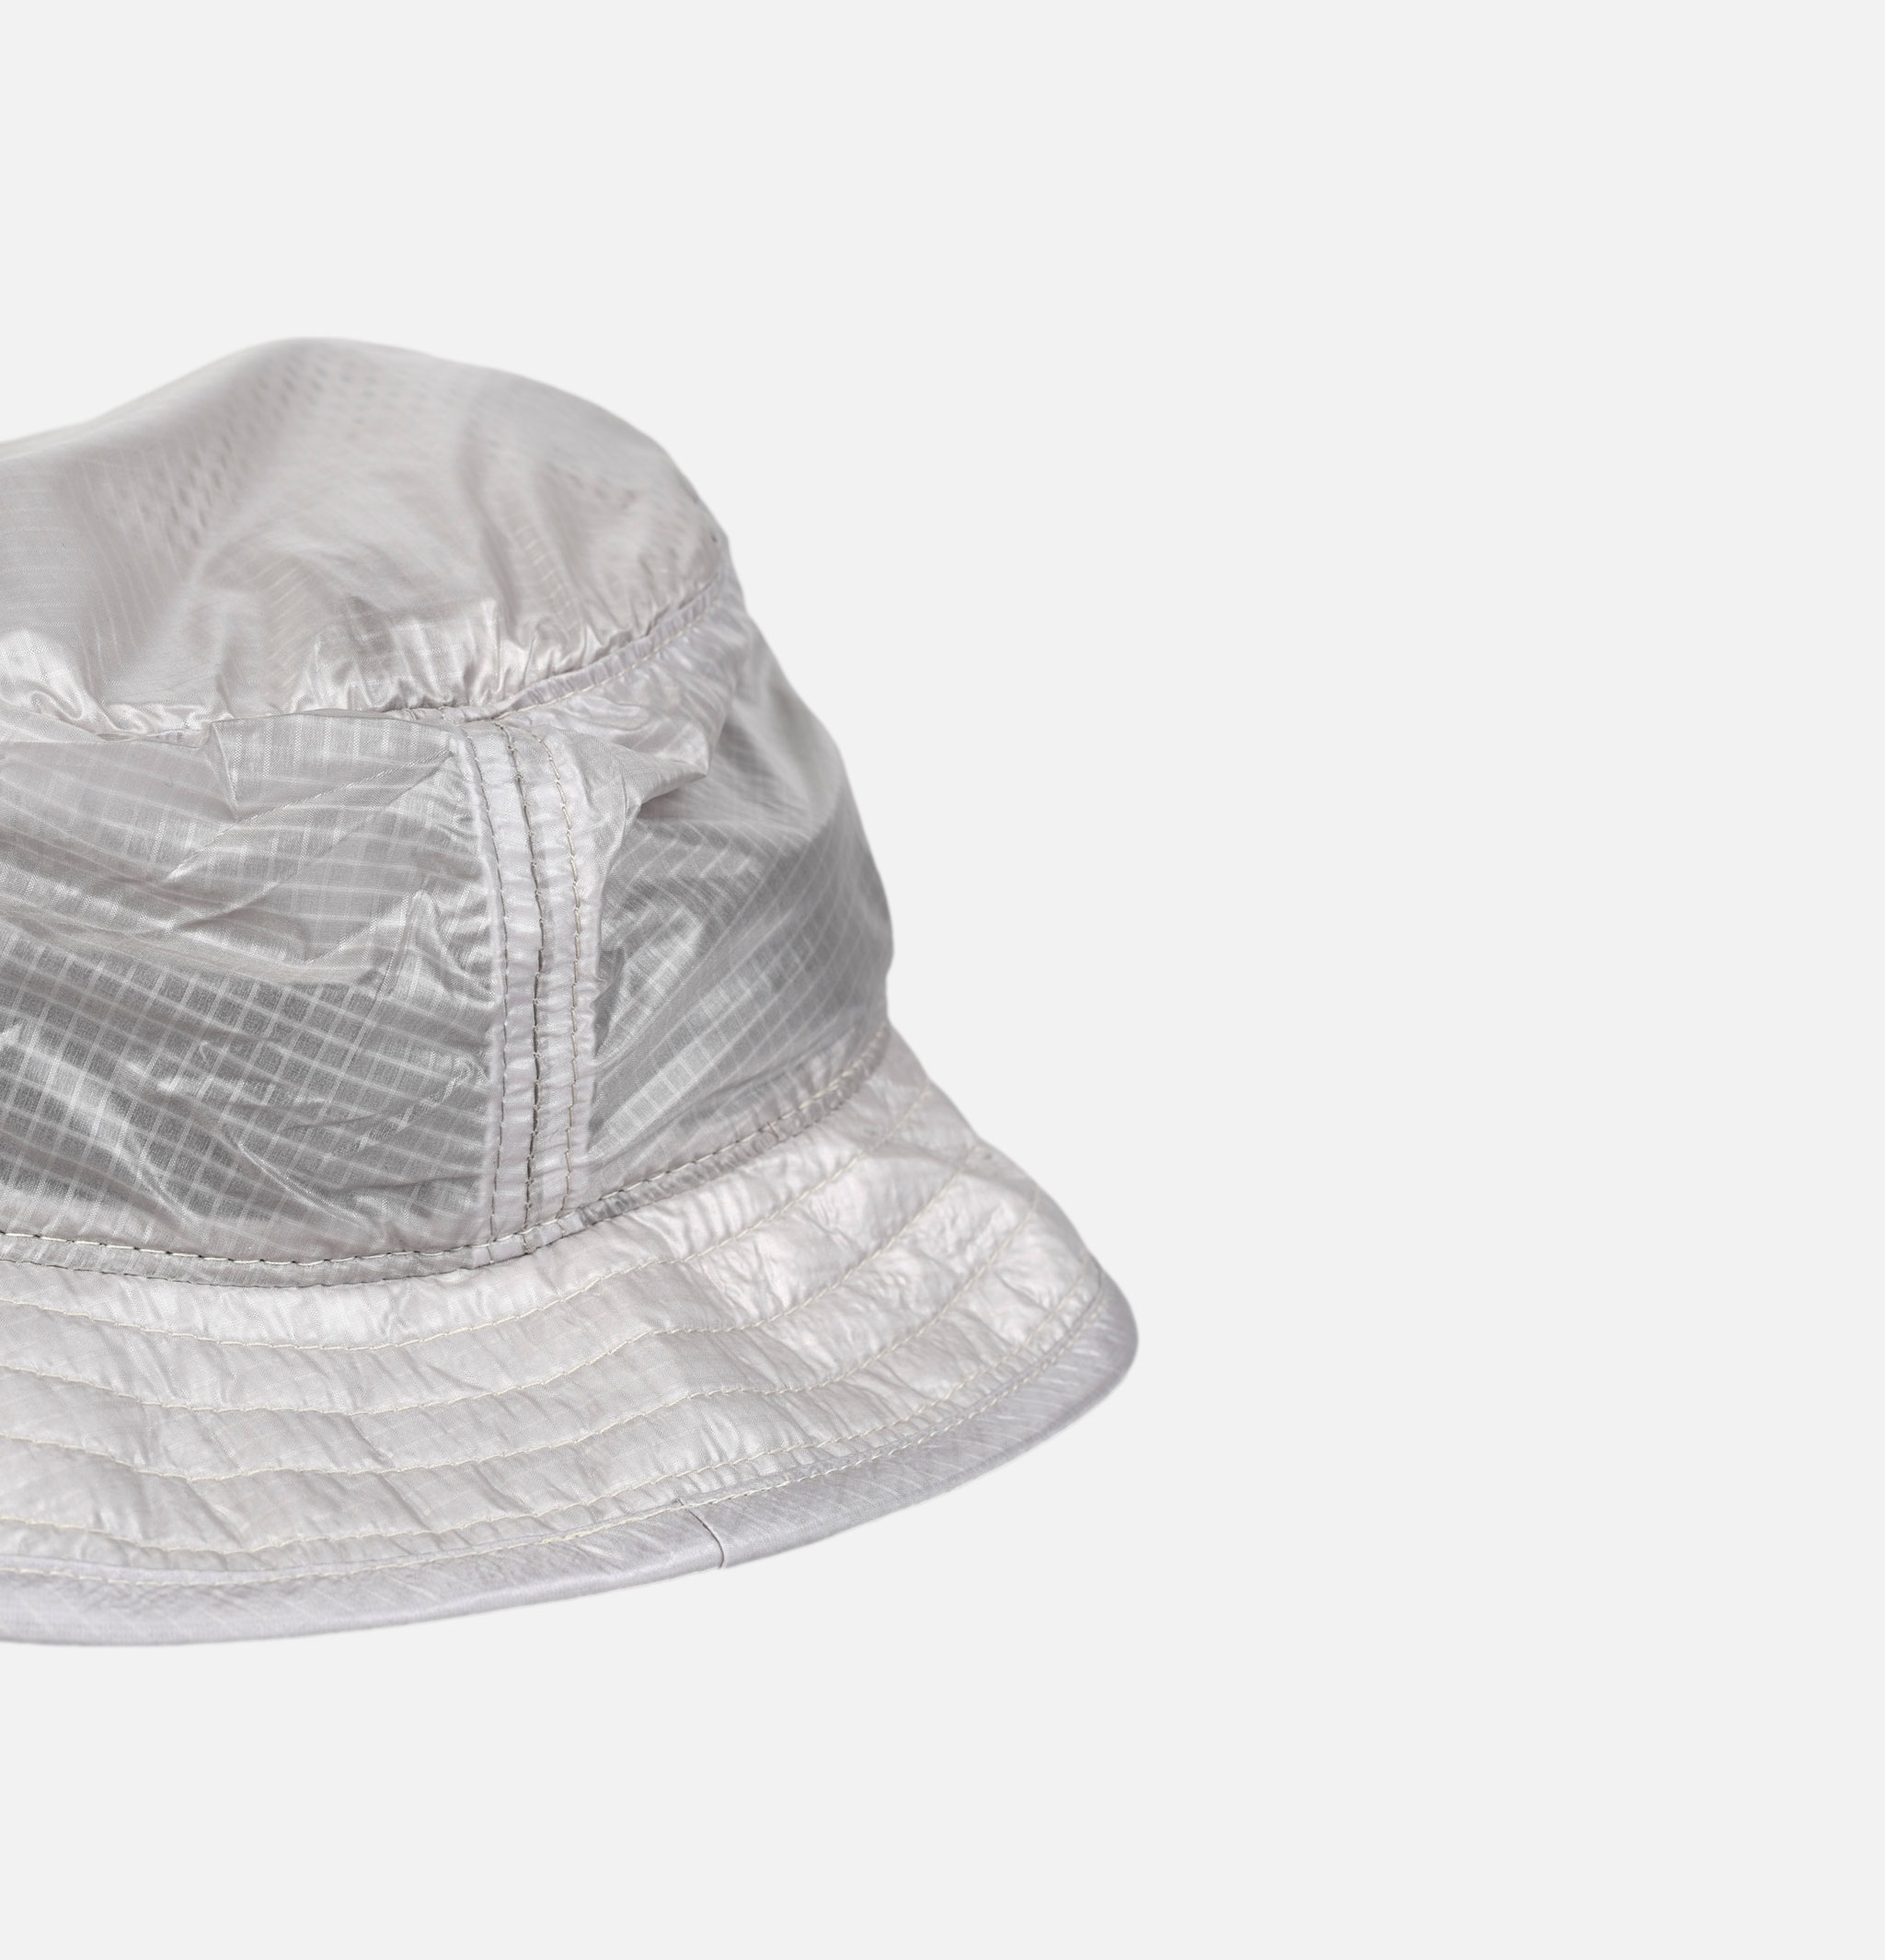 Found Featherism Crusher Air Light Ripstop Grey hat